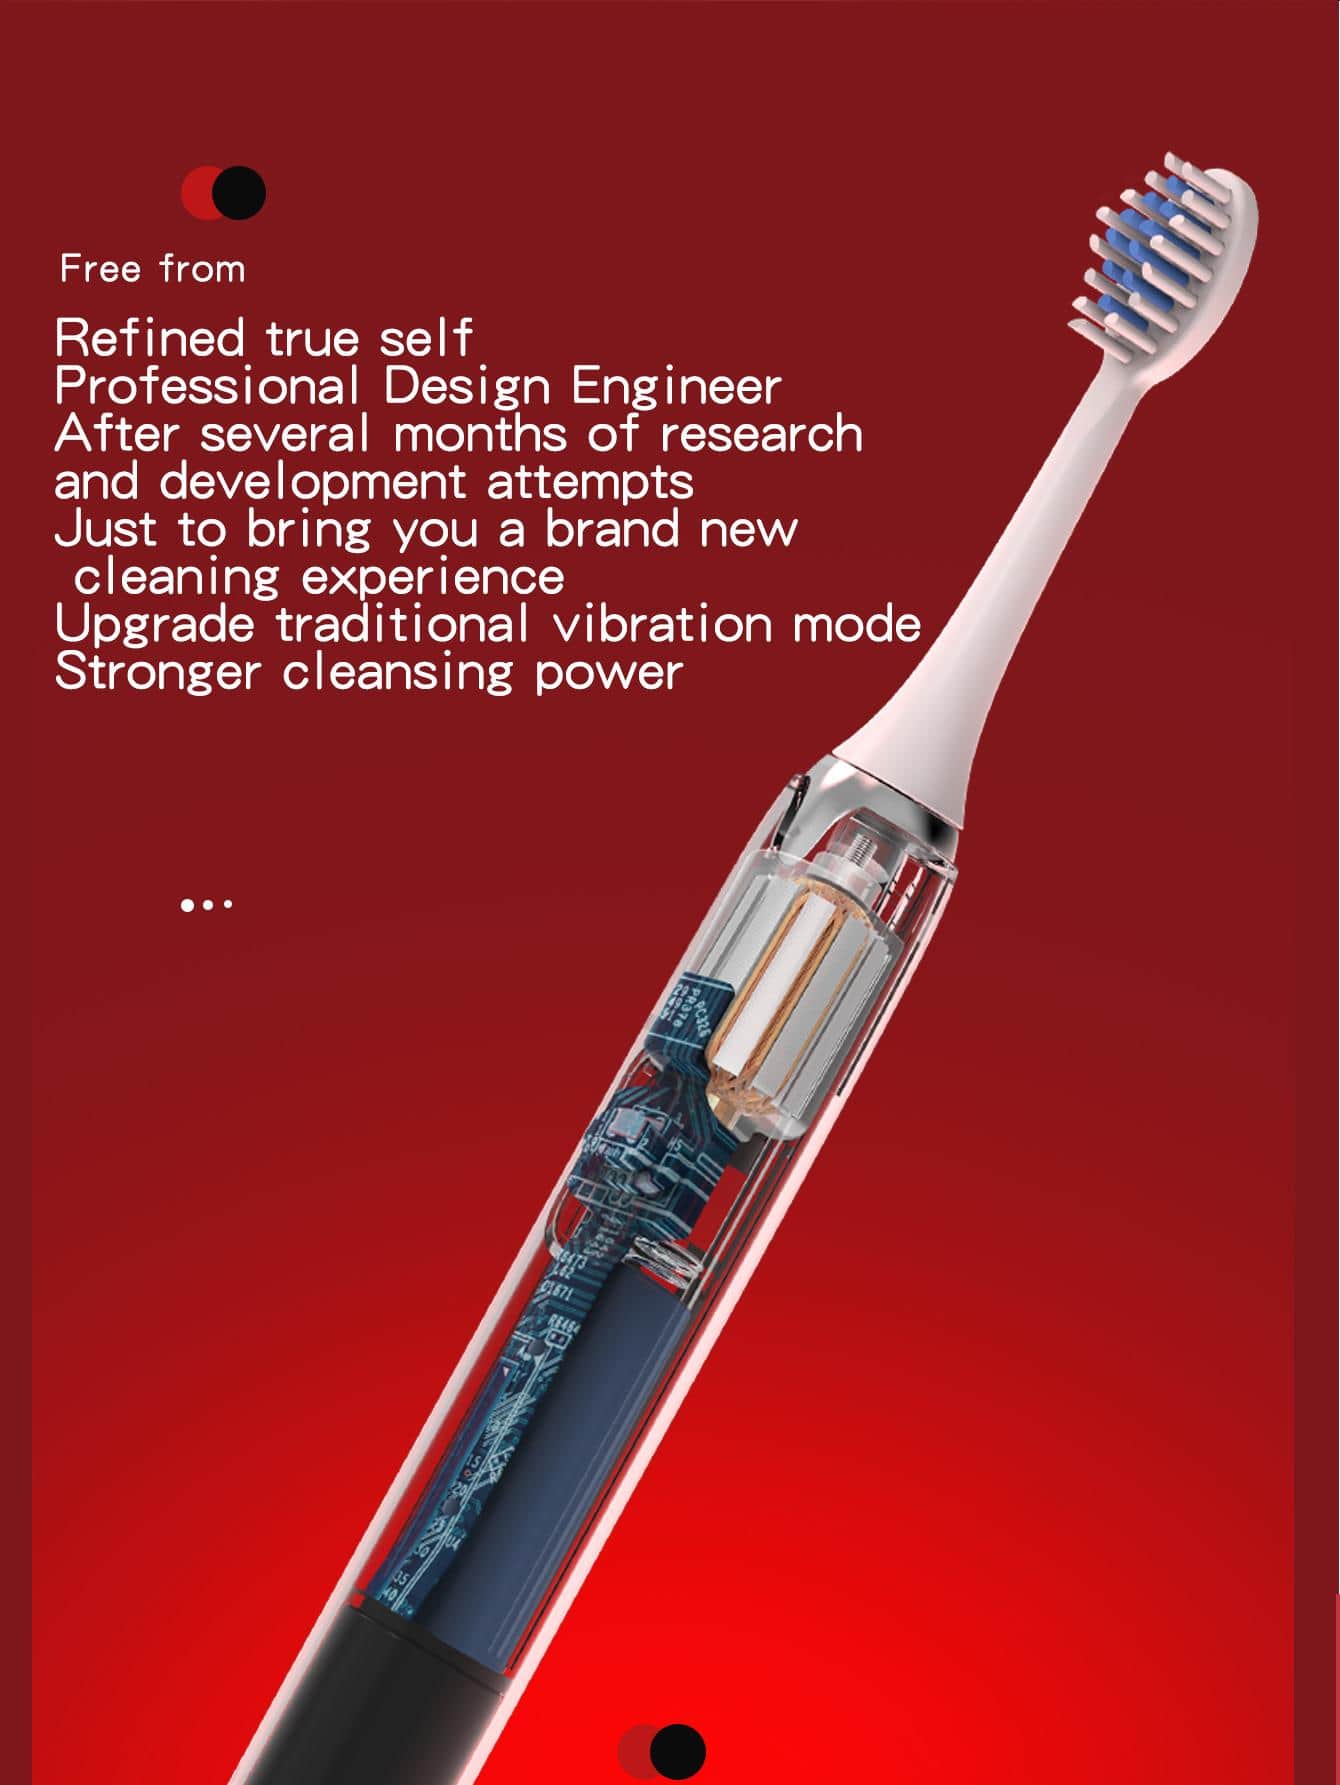 1pc PP Electric Toothbrush With 8pcs Brush Head, Modern Waterproof Electric Toothbrush For Home